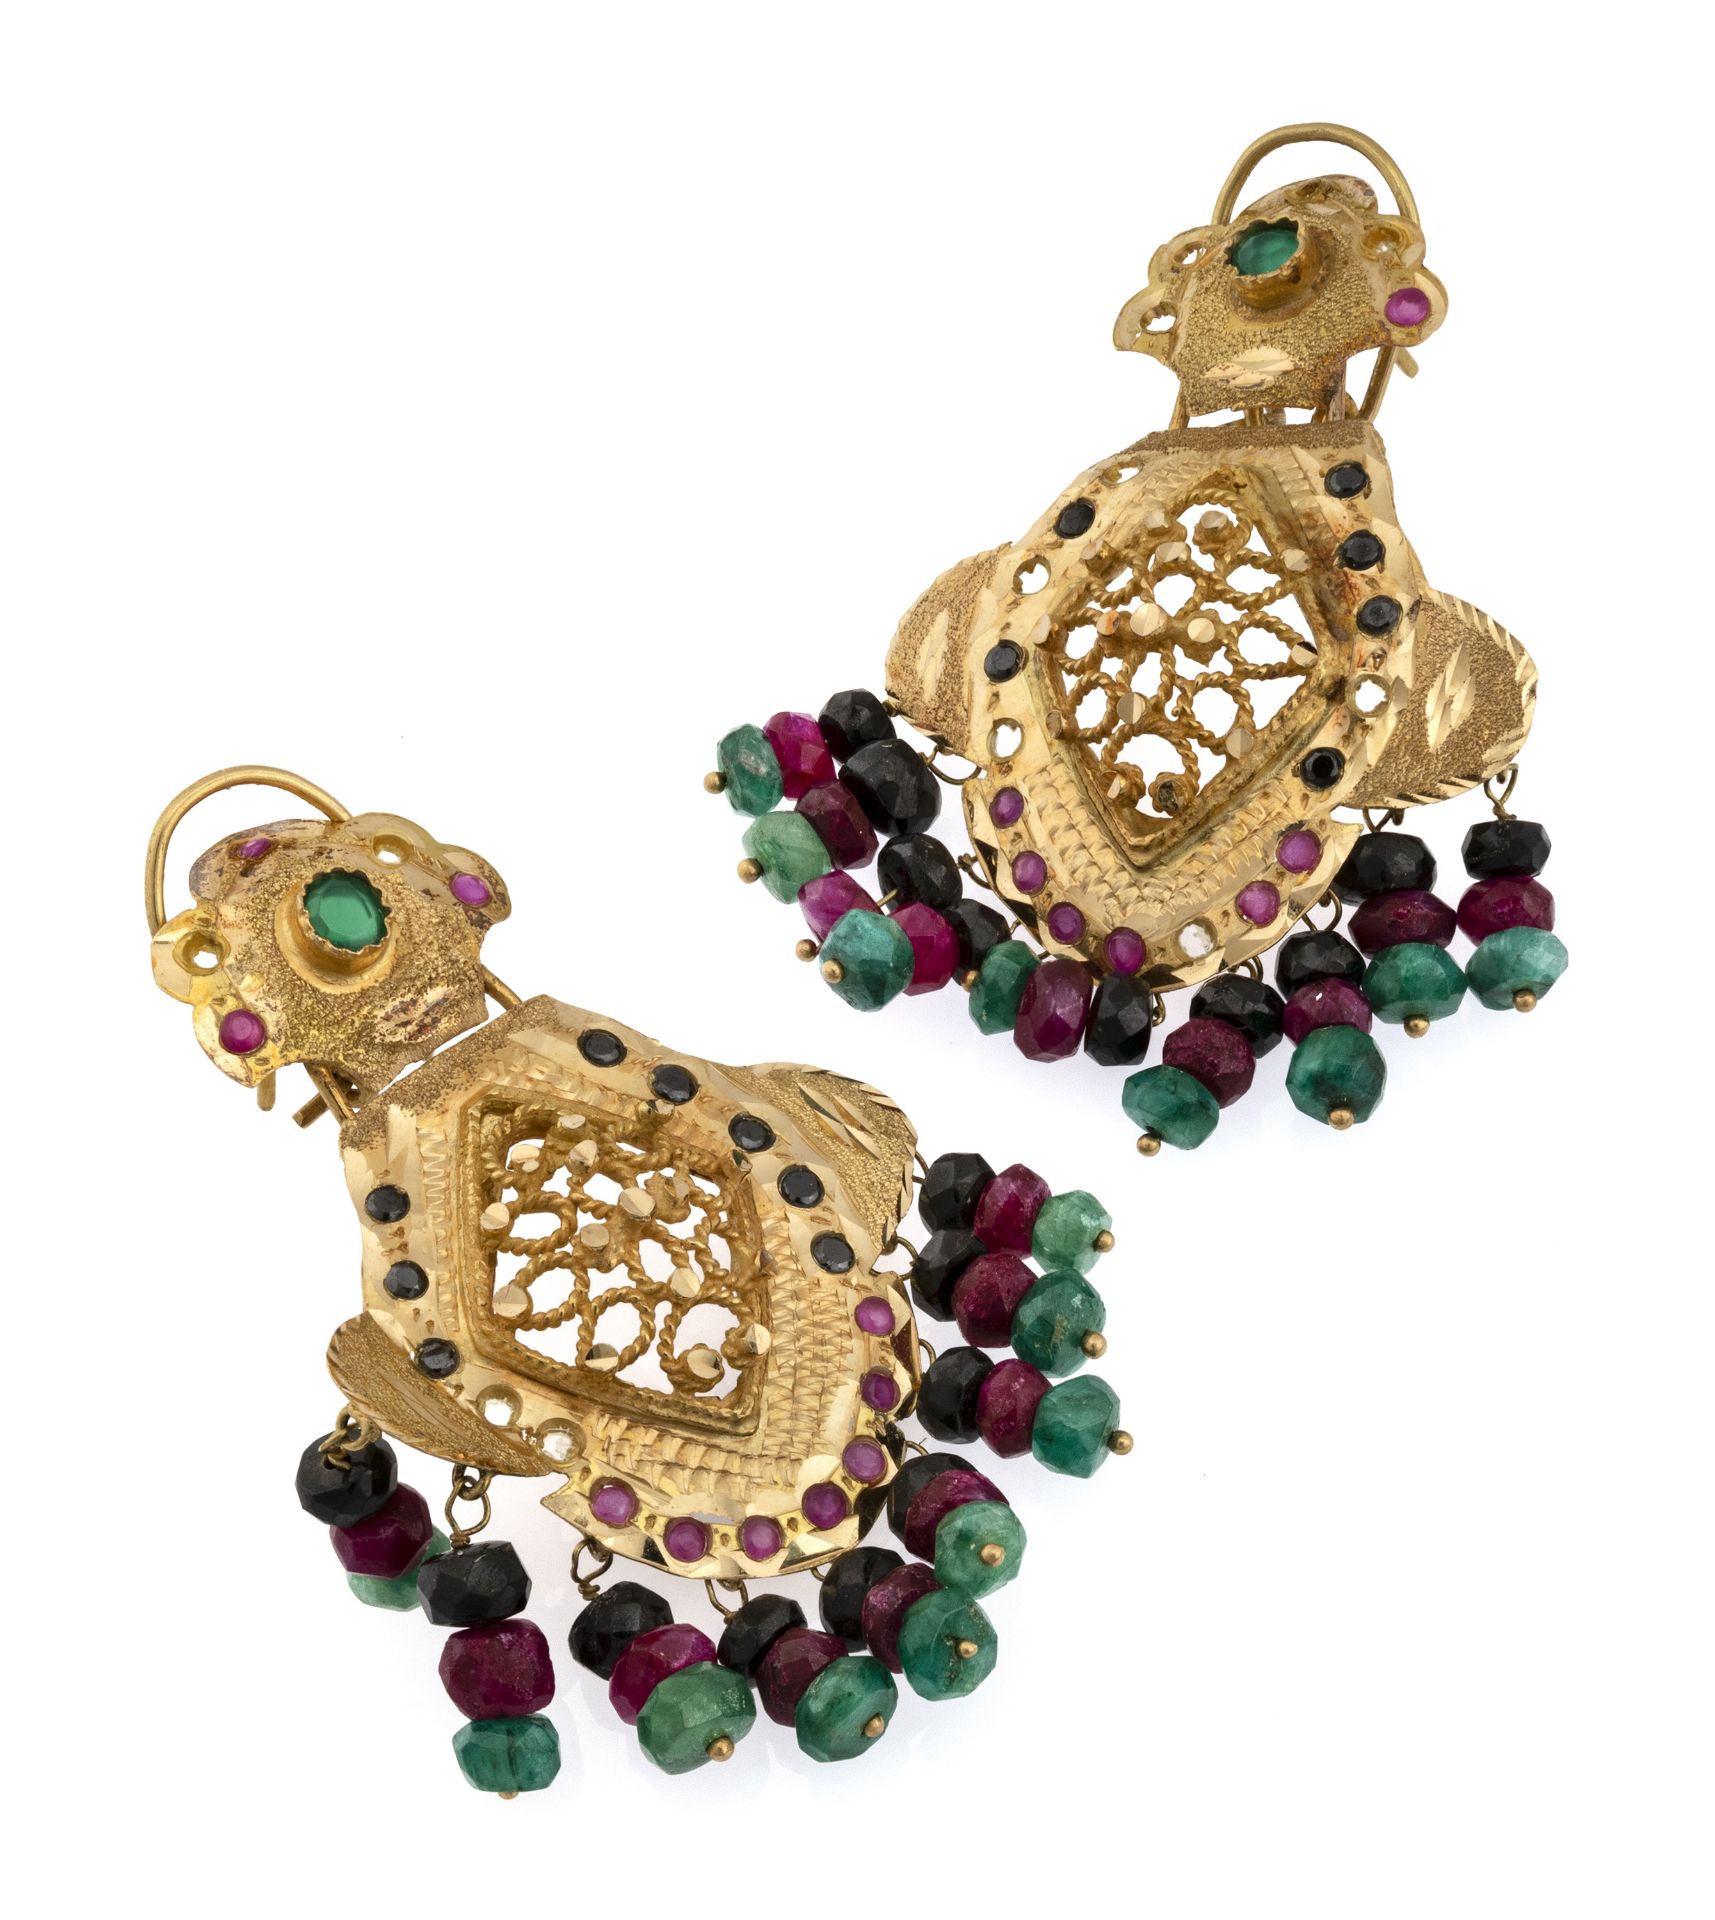 GOLD EARRINGS WITH RUBIES SAPPHIRES AND EMERALDS